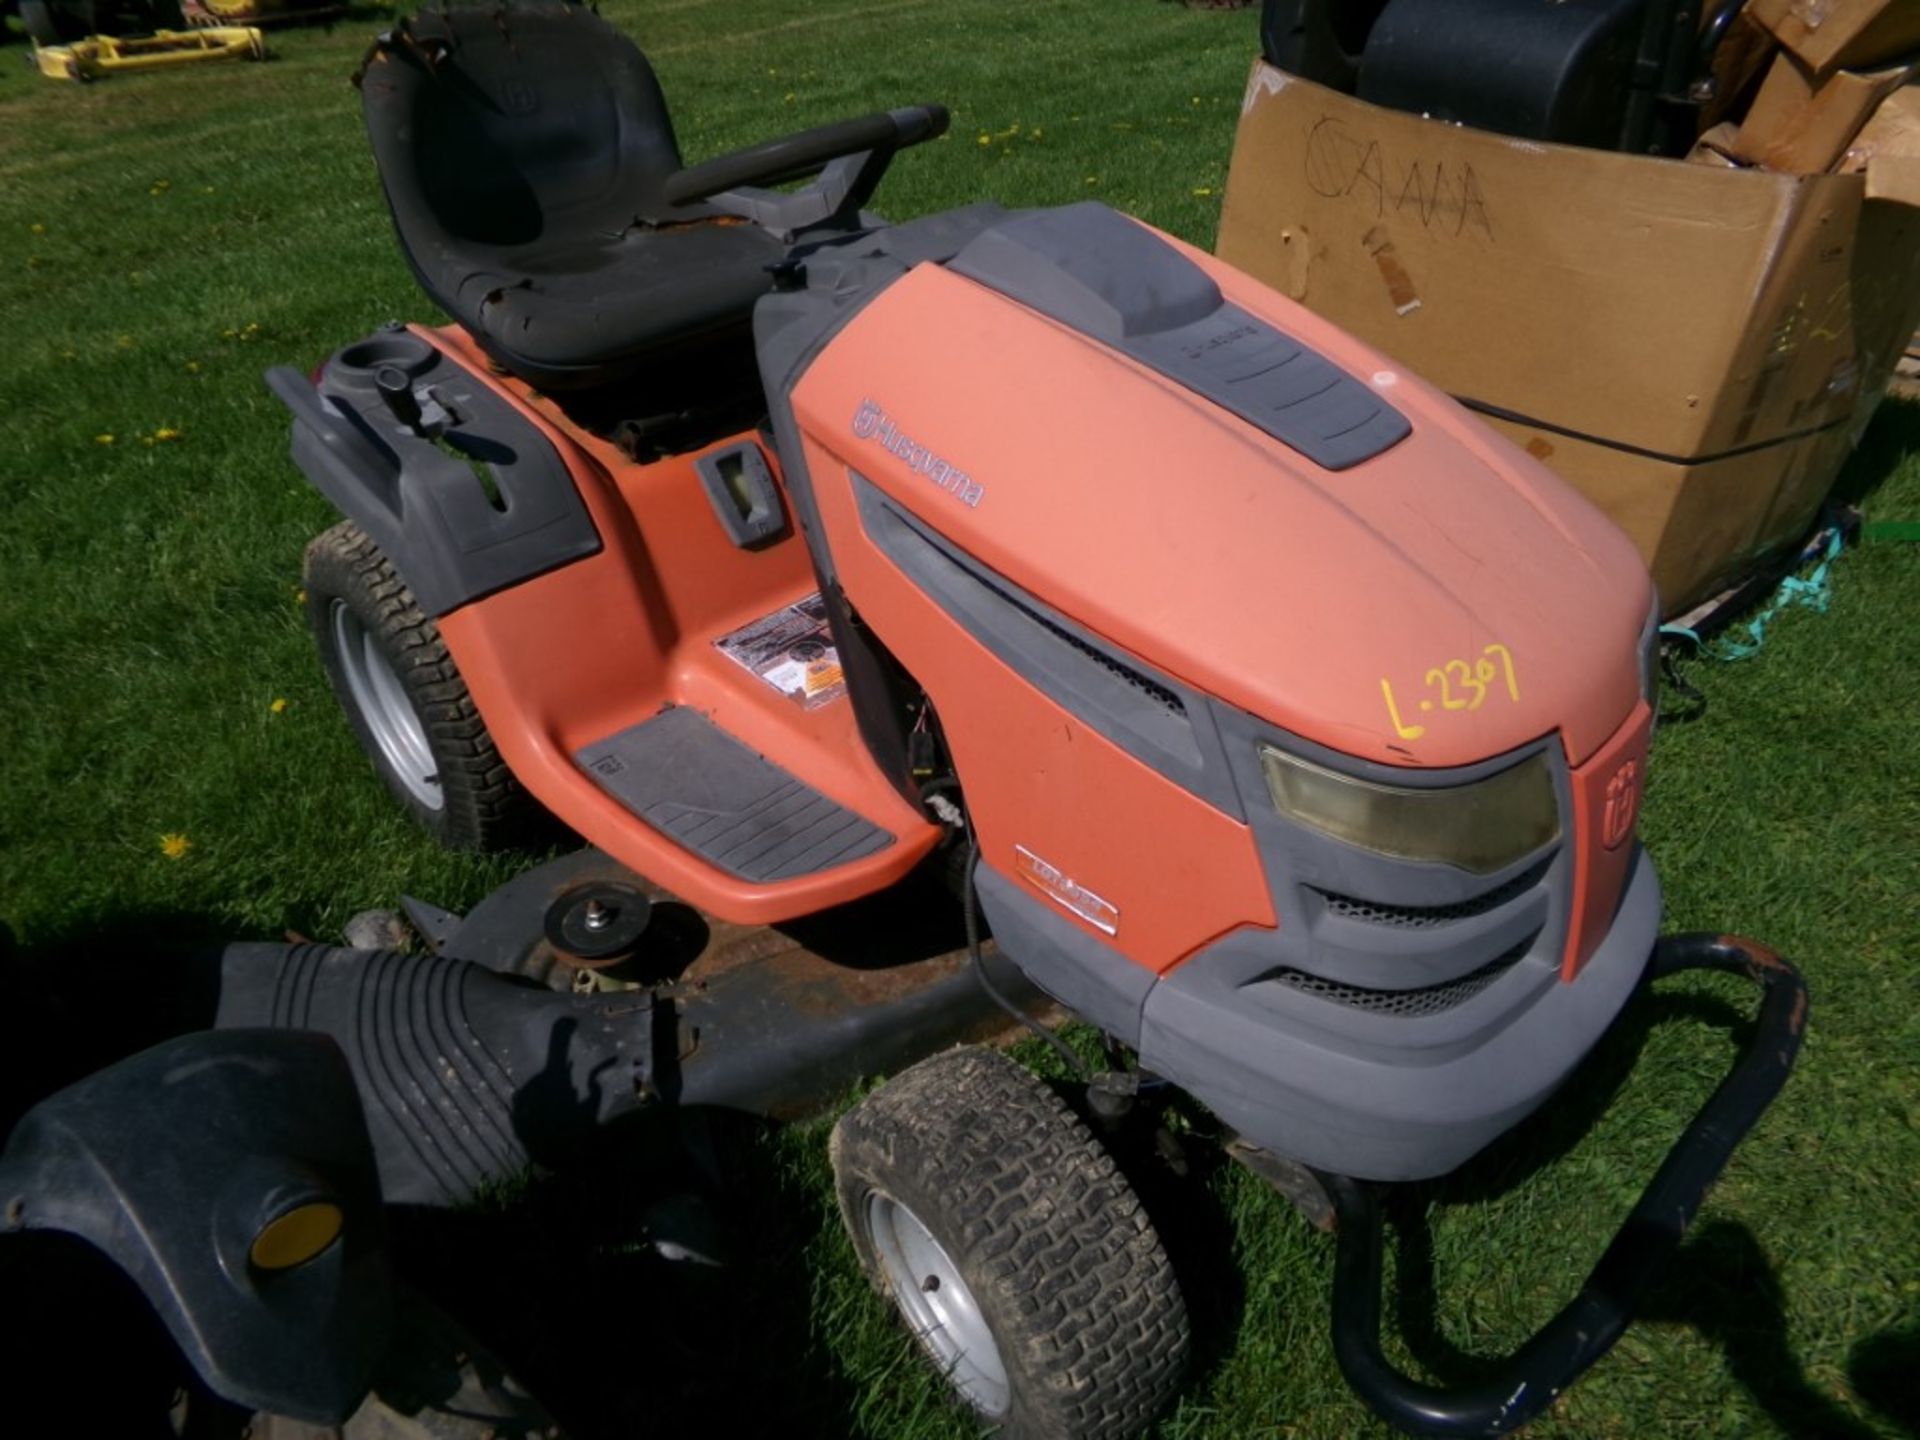 Husqvarna LGT 2554 with 54'' Deck, 25HP, NOT RUNNING-ELECTRIC ISSUE (5560)